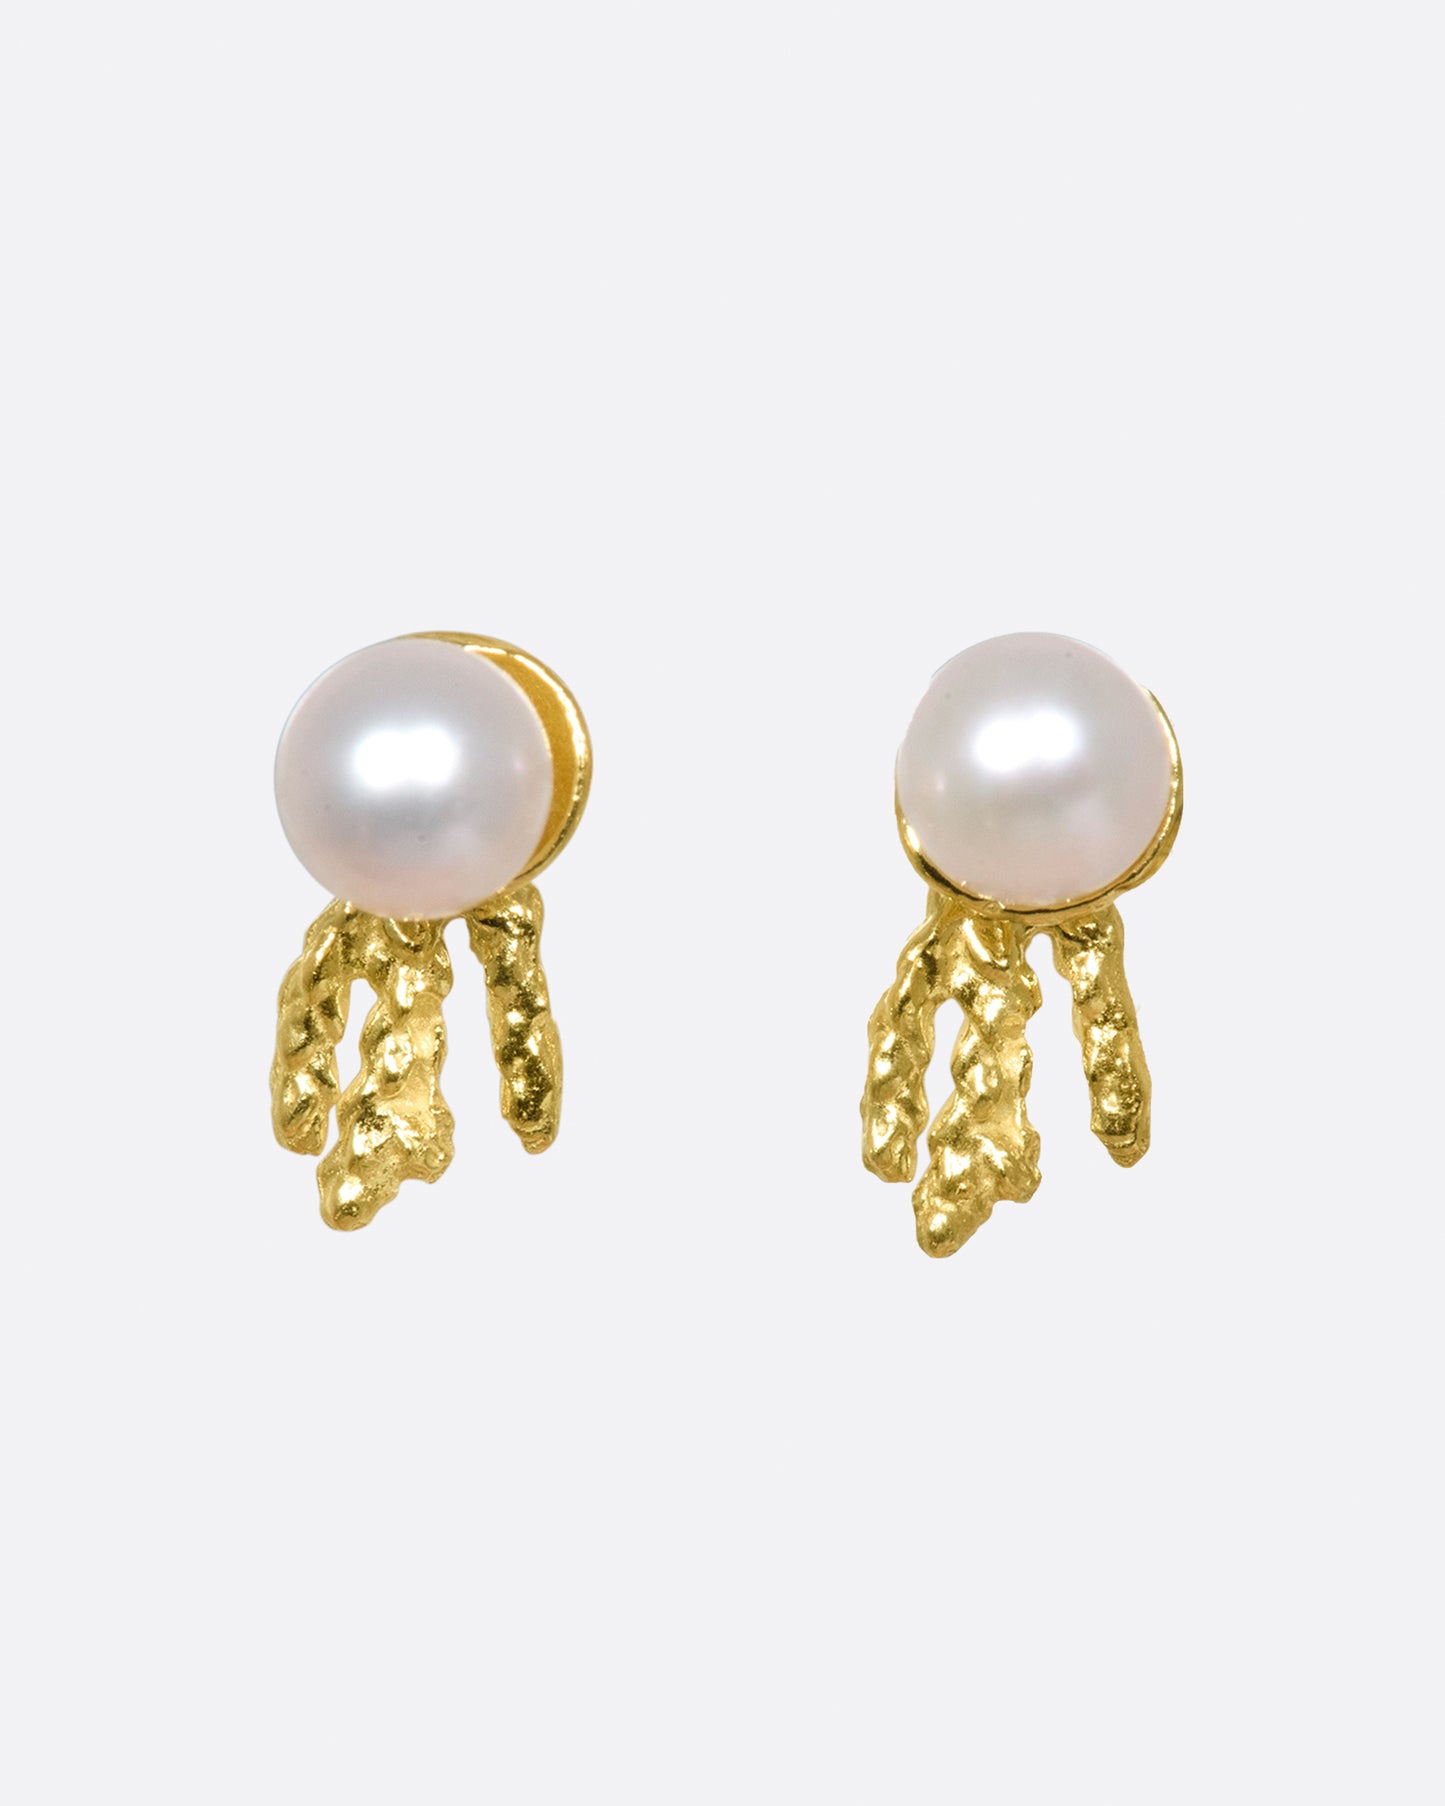 A pair of comet-like studs with Akoya pearls and gold trails.